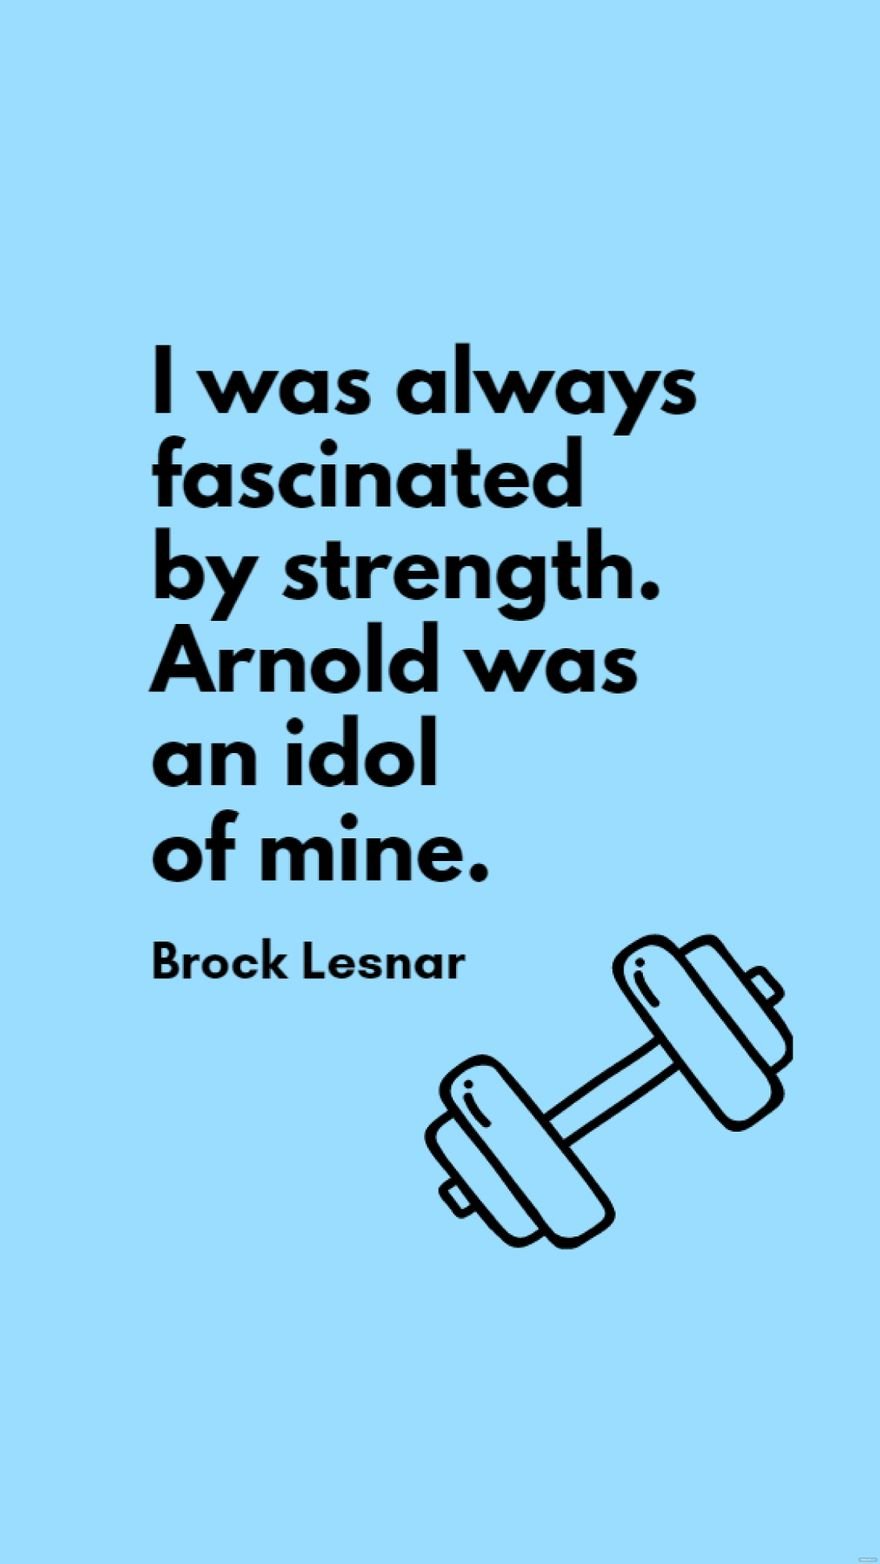 Brock Lesnar - I was always fascinated by strength. Arnold was an idol of mine.